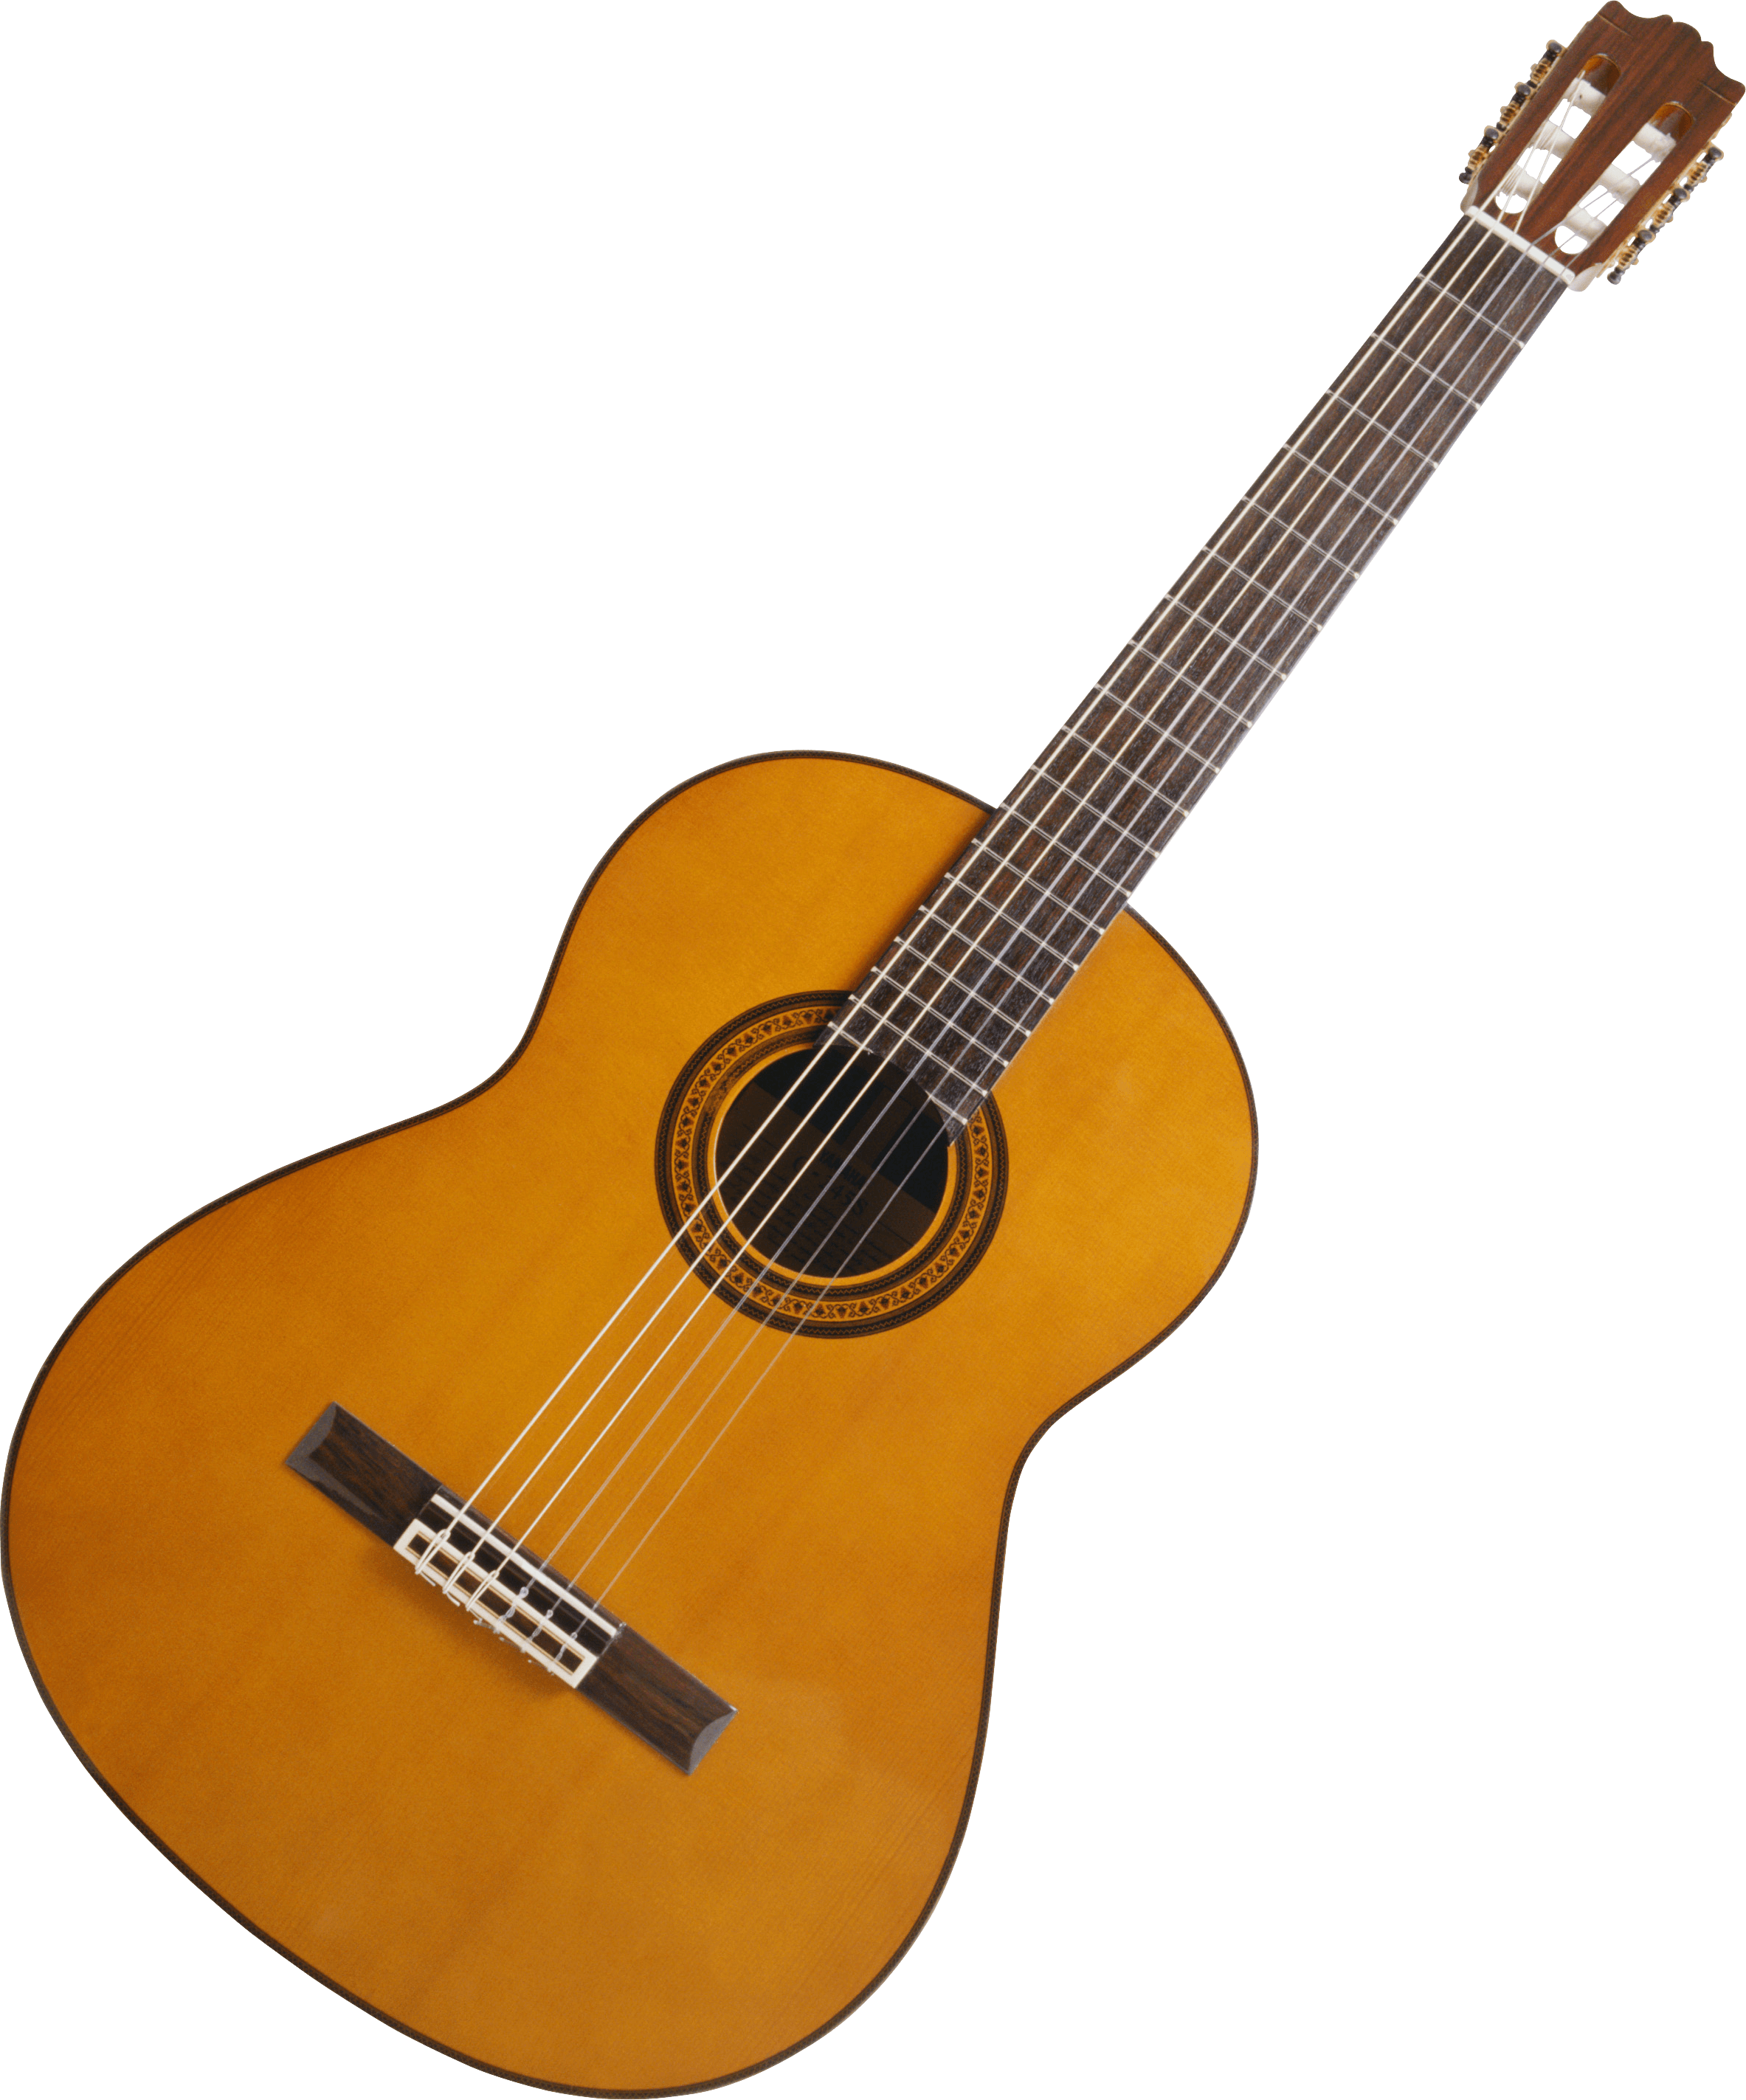 Acoustic Wooden Guitar Png Image Png Image - Guitar, Transparent background PNG HD thumbnail